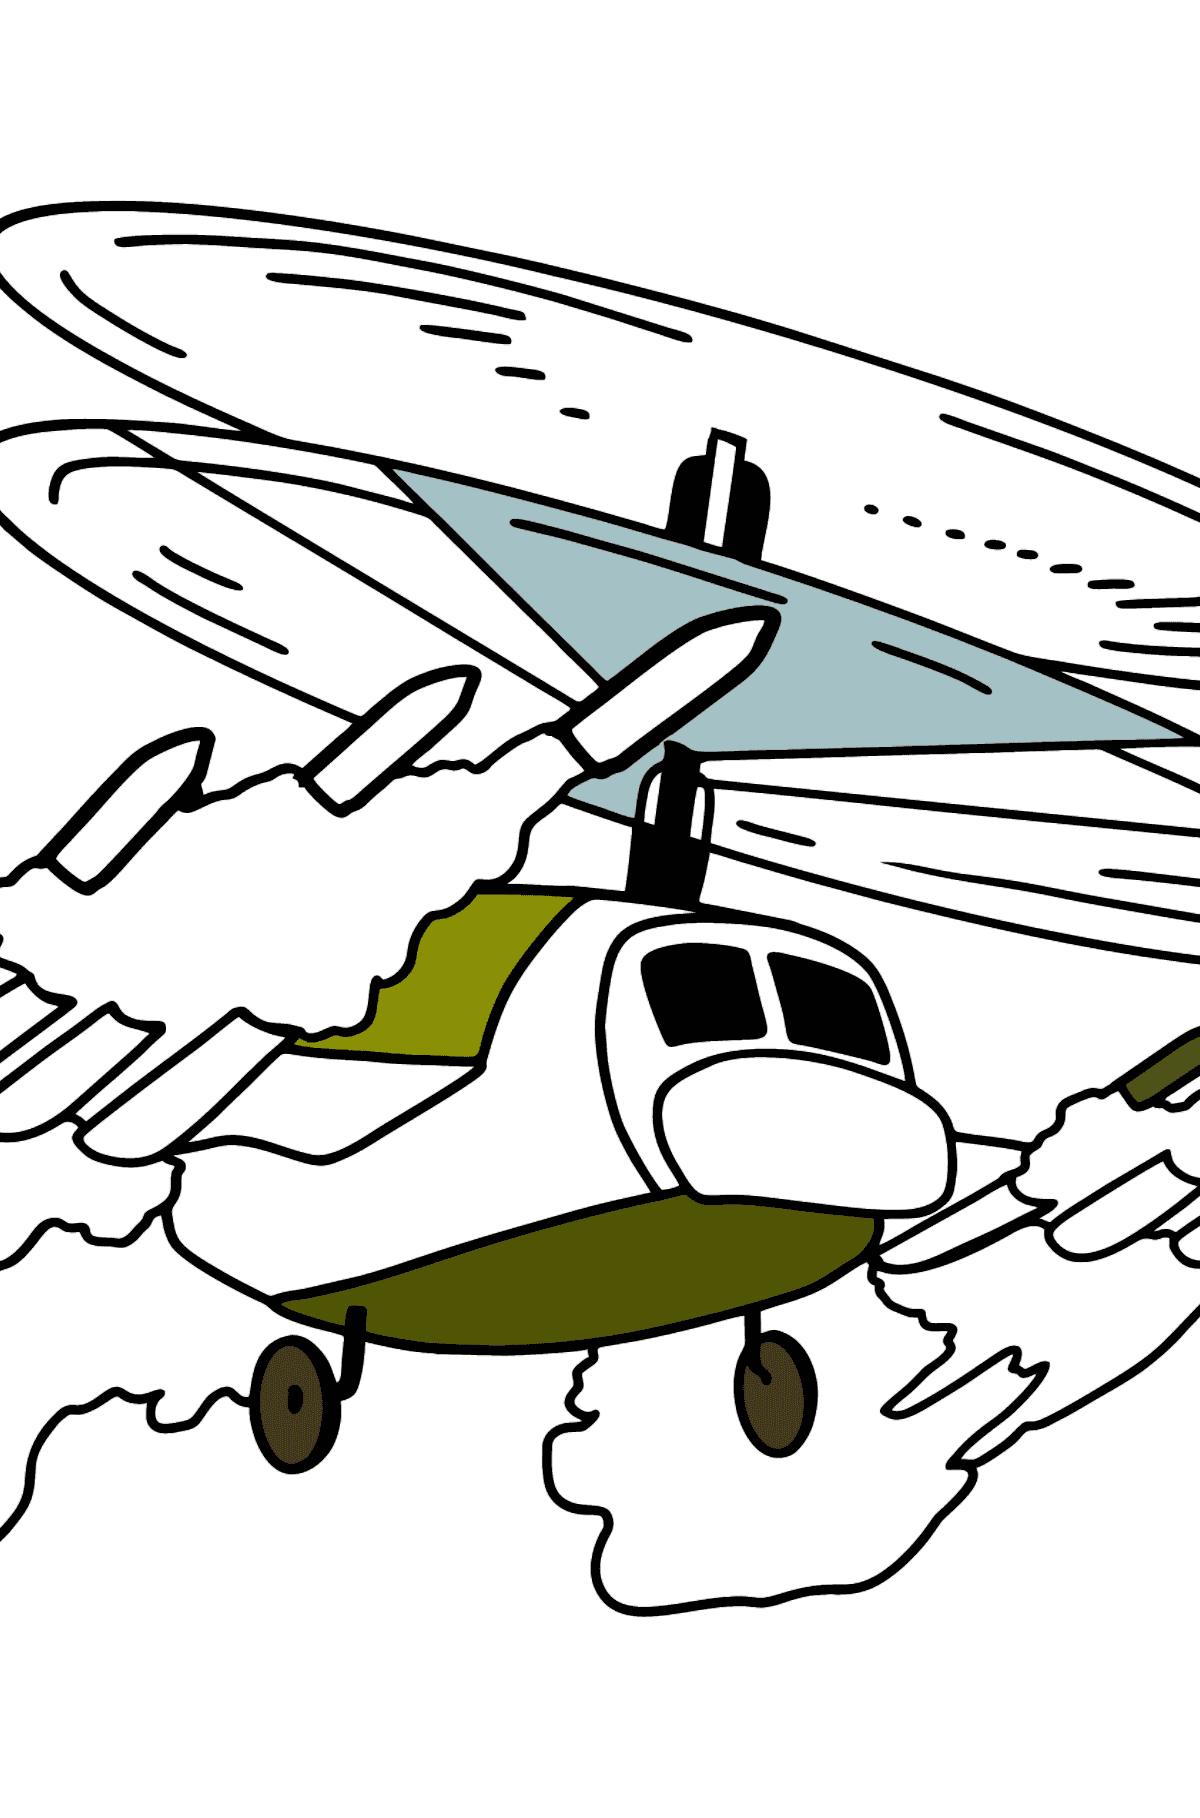 Coloring Page - A Military Helicopter - Coloring Pages for Kids